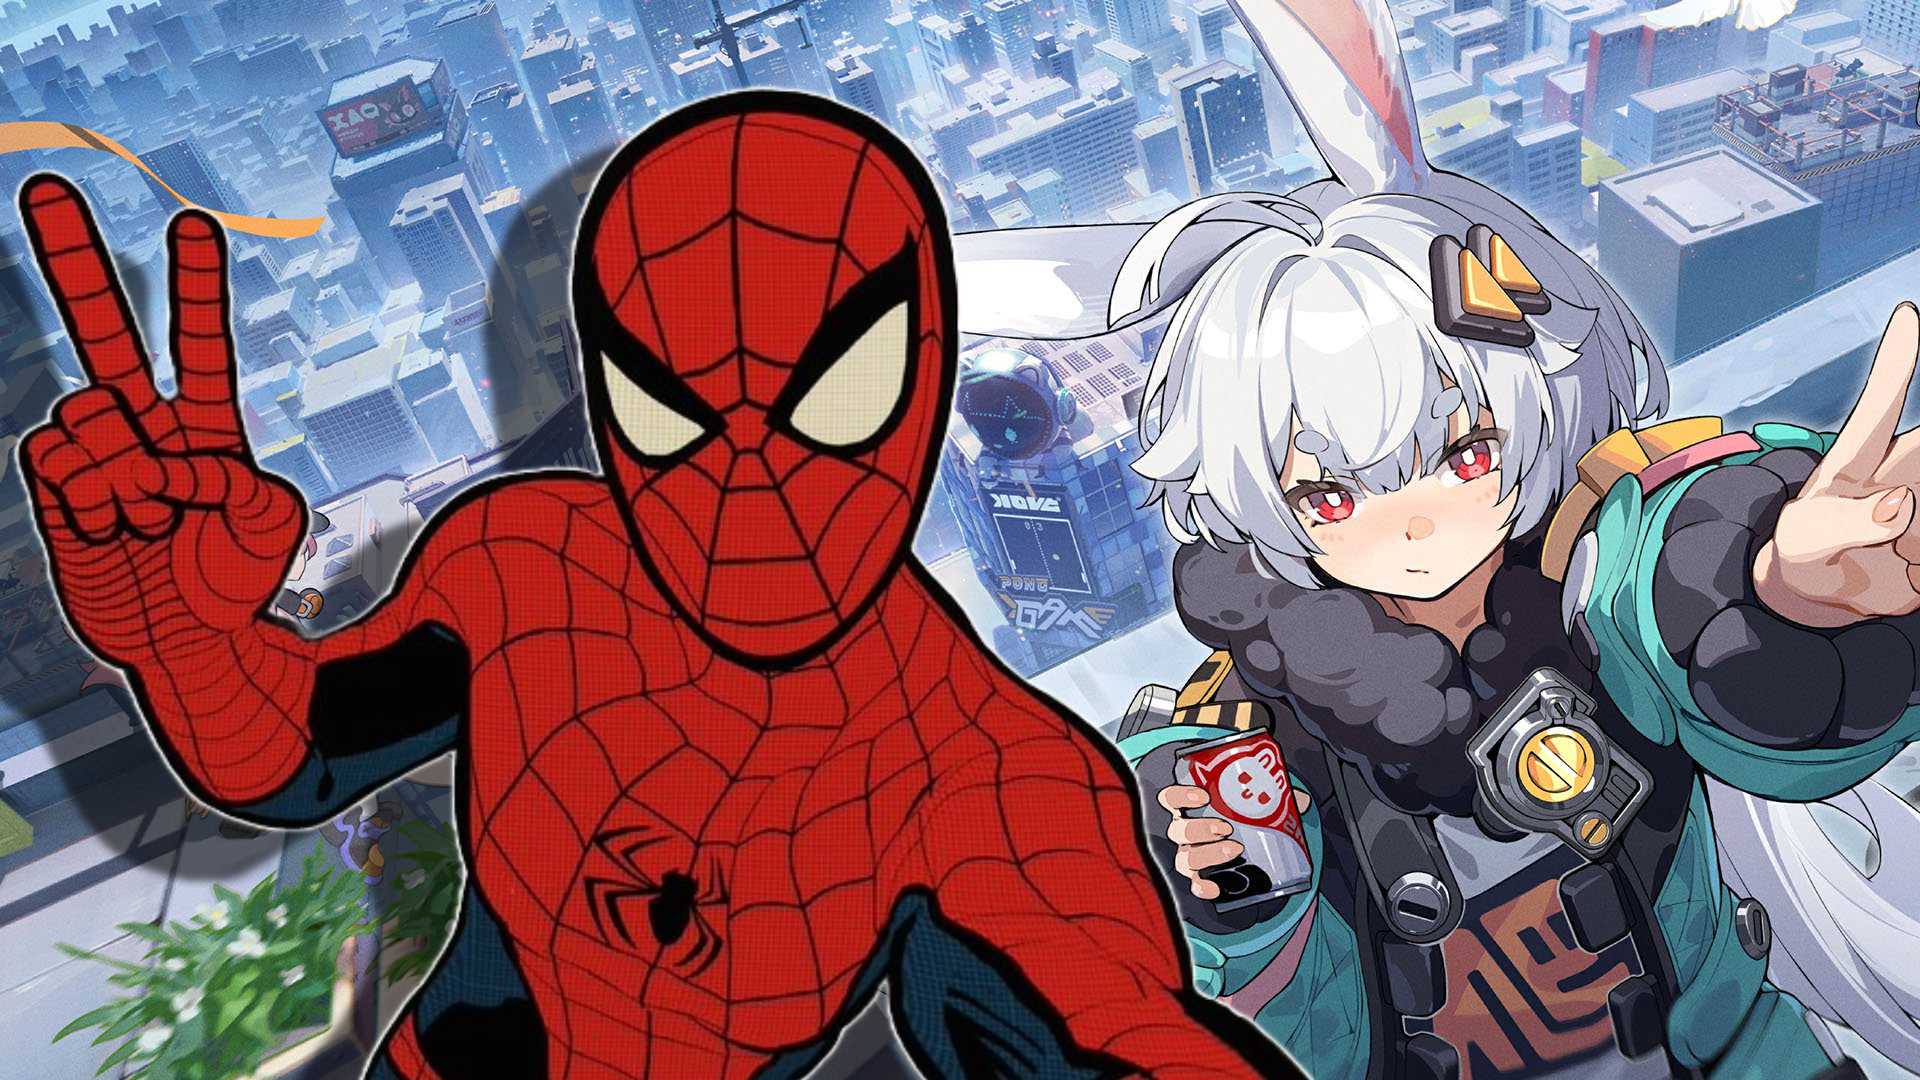 Project Mugen Offers Spider-Man-Inspired Anime Action